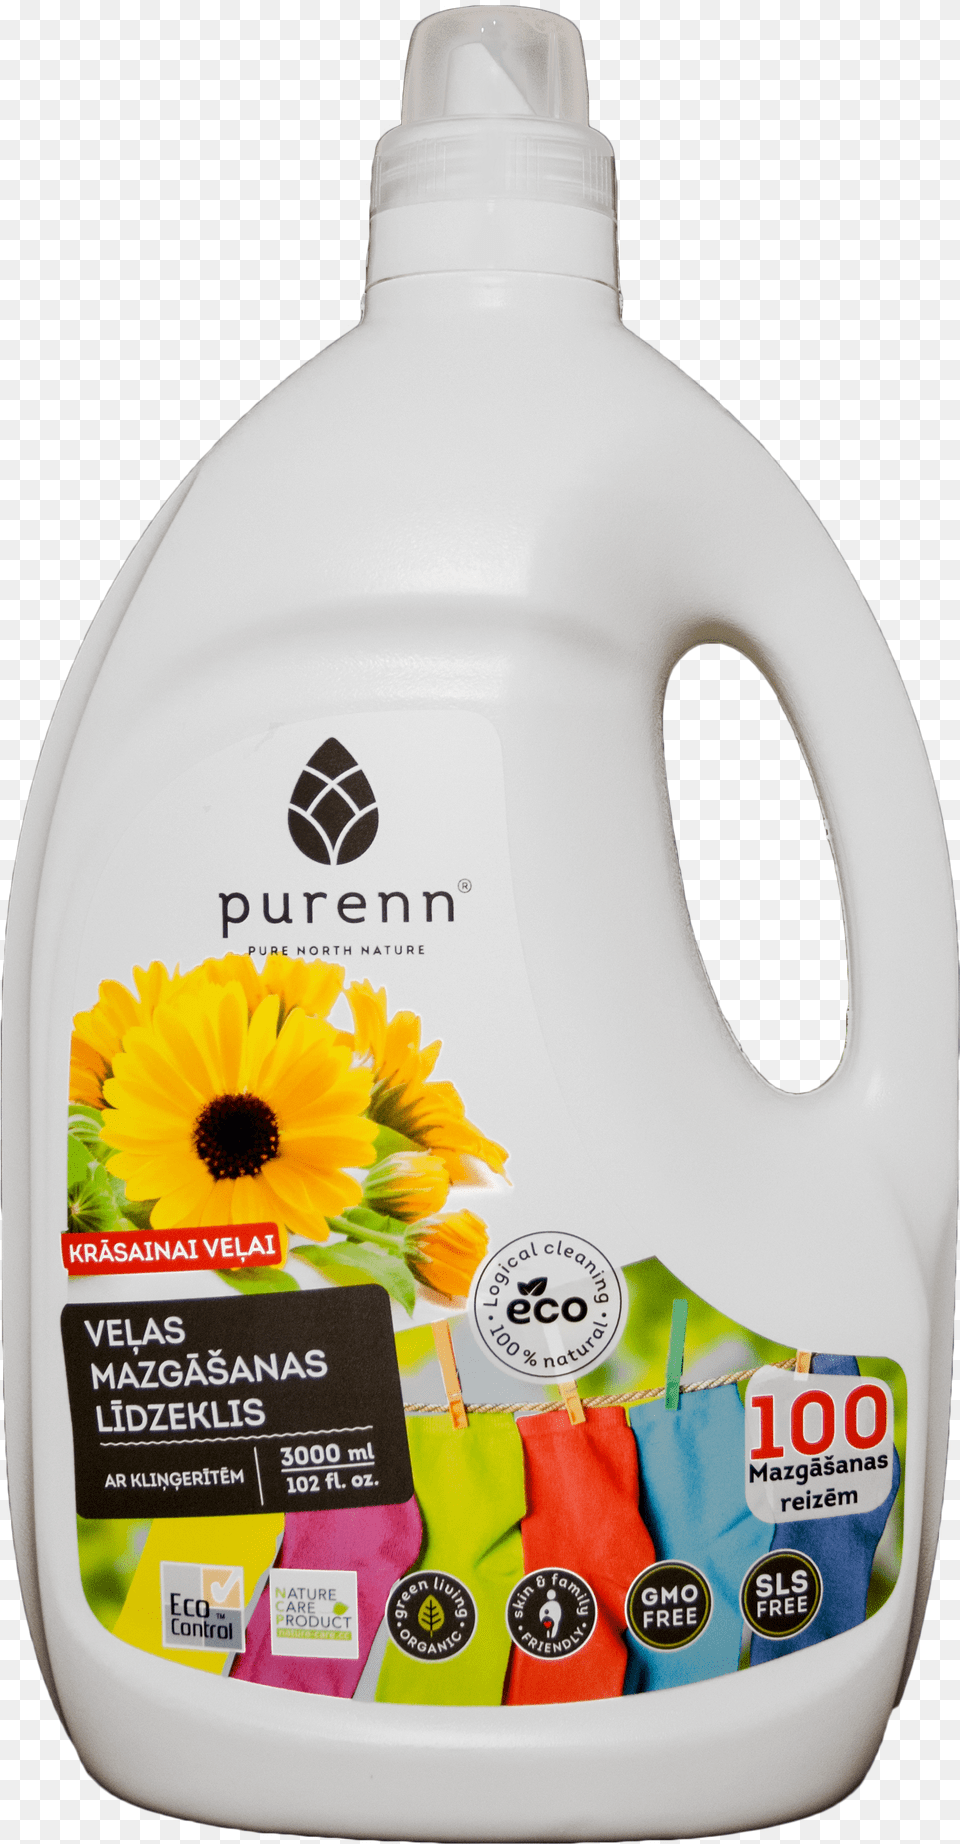 Purenn Liquid Detergent For Colored Laundry With Calendula Laundry Detergent Png Image